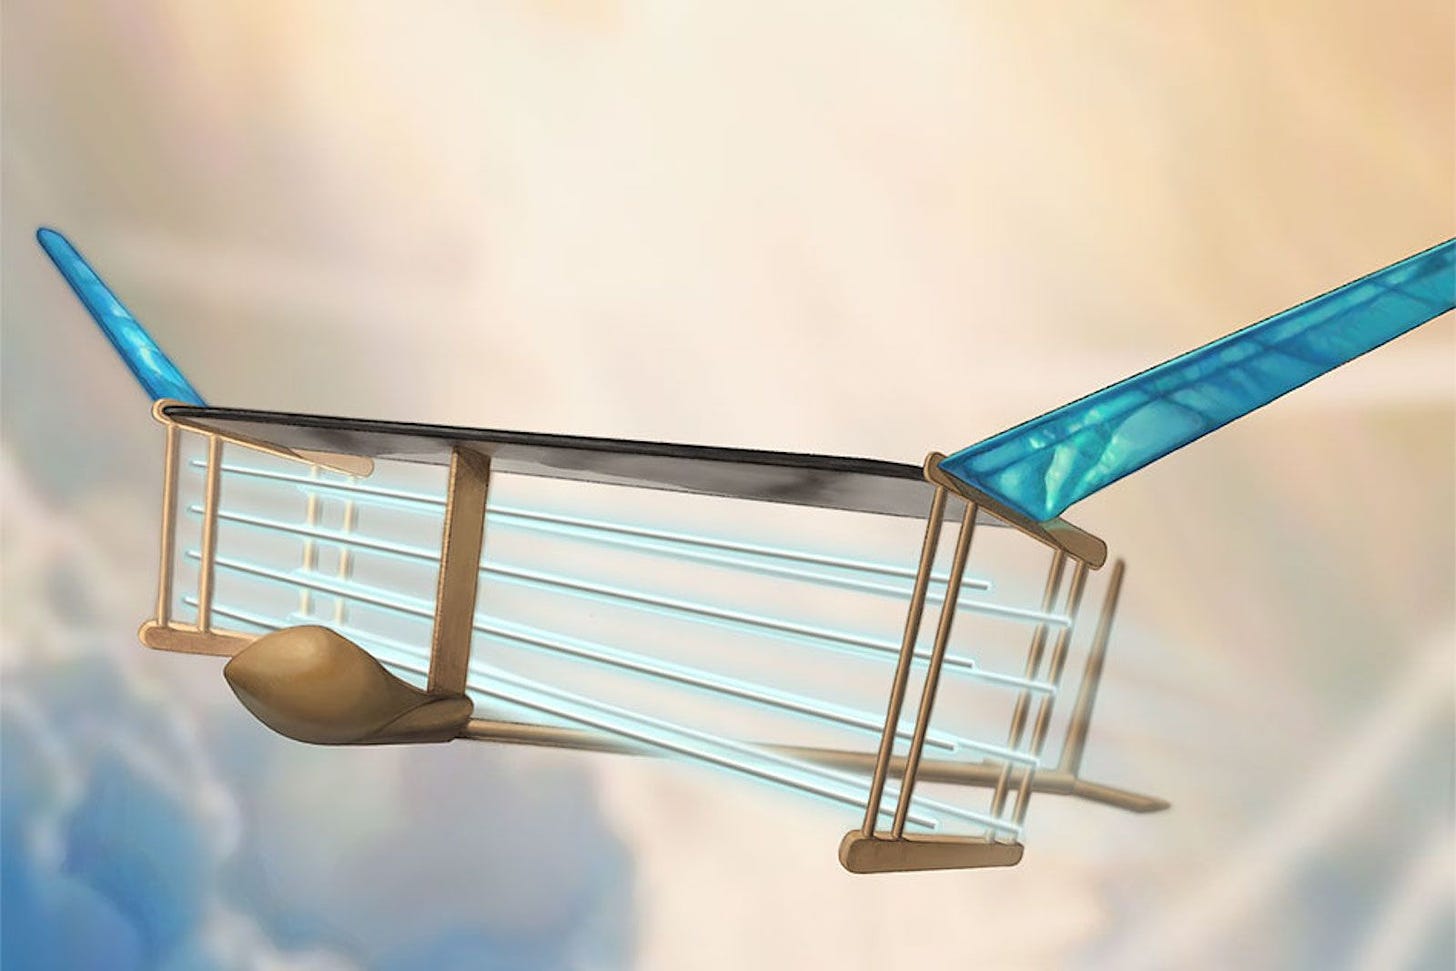 MIT ion plane has no moving parts, doesn't need an engine to fly | CNN